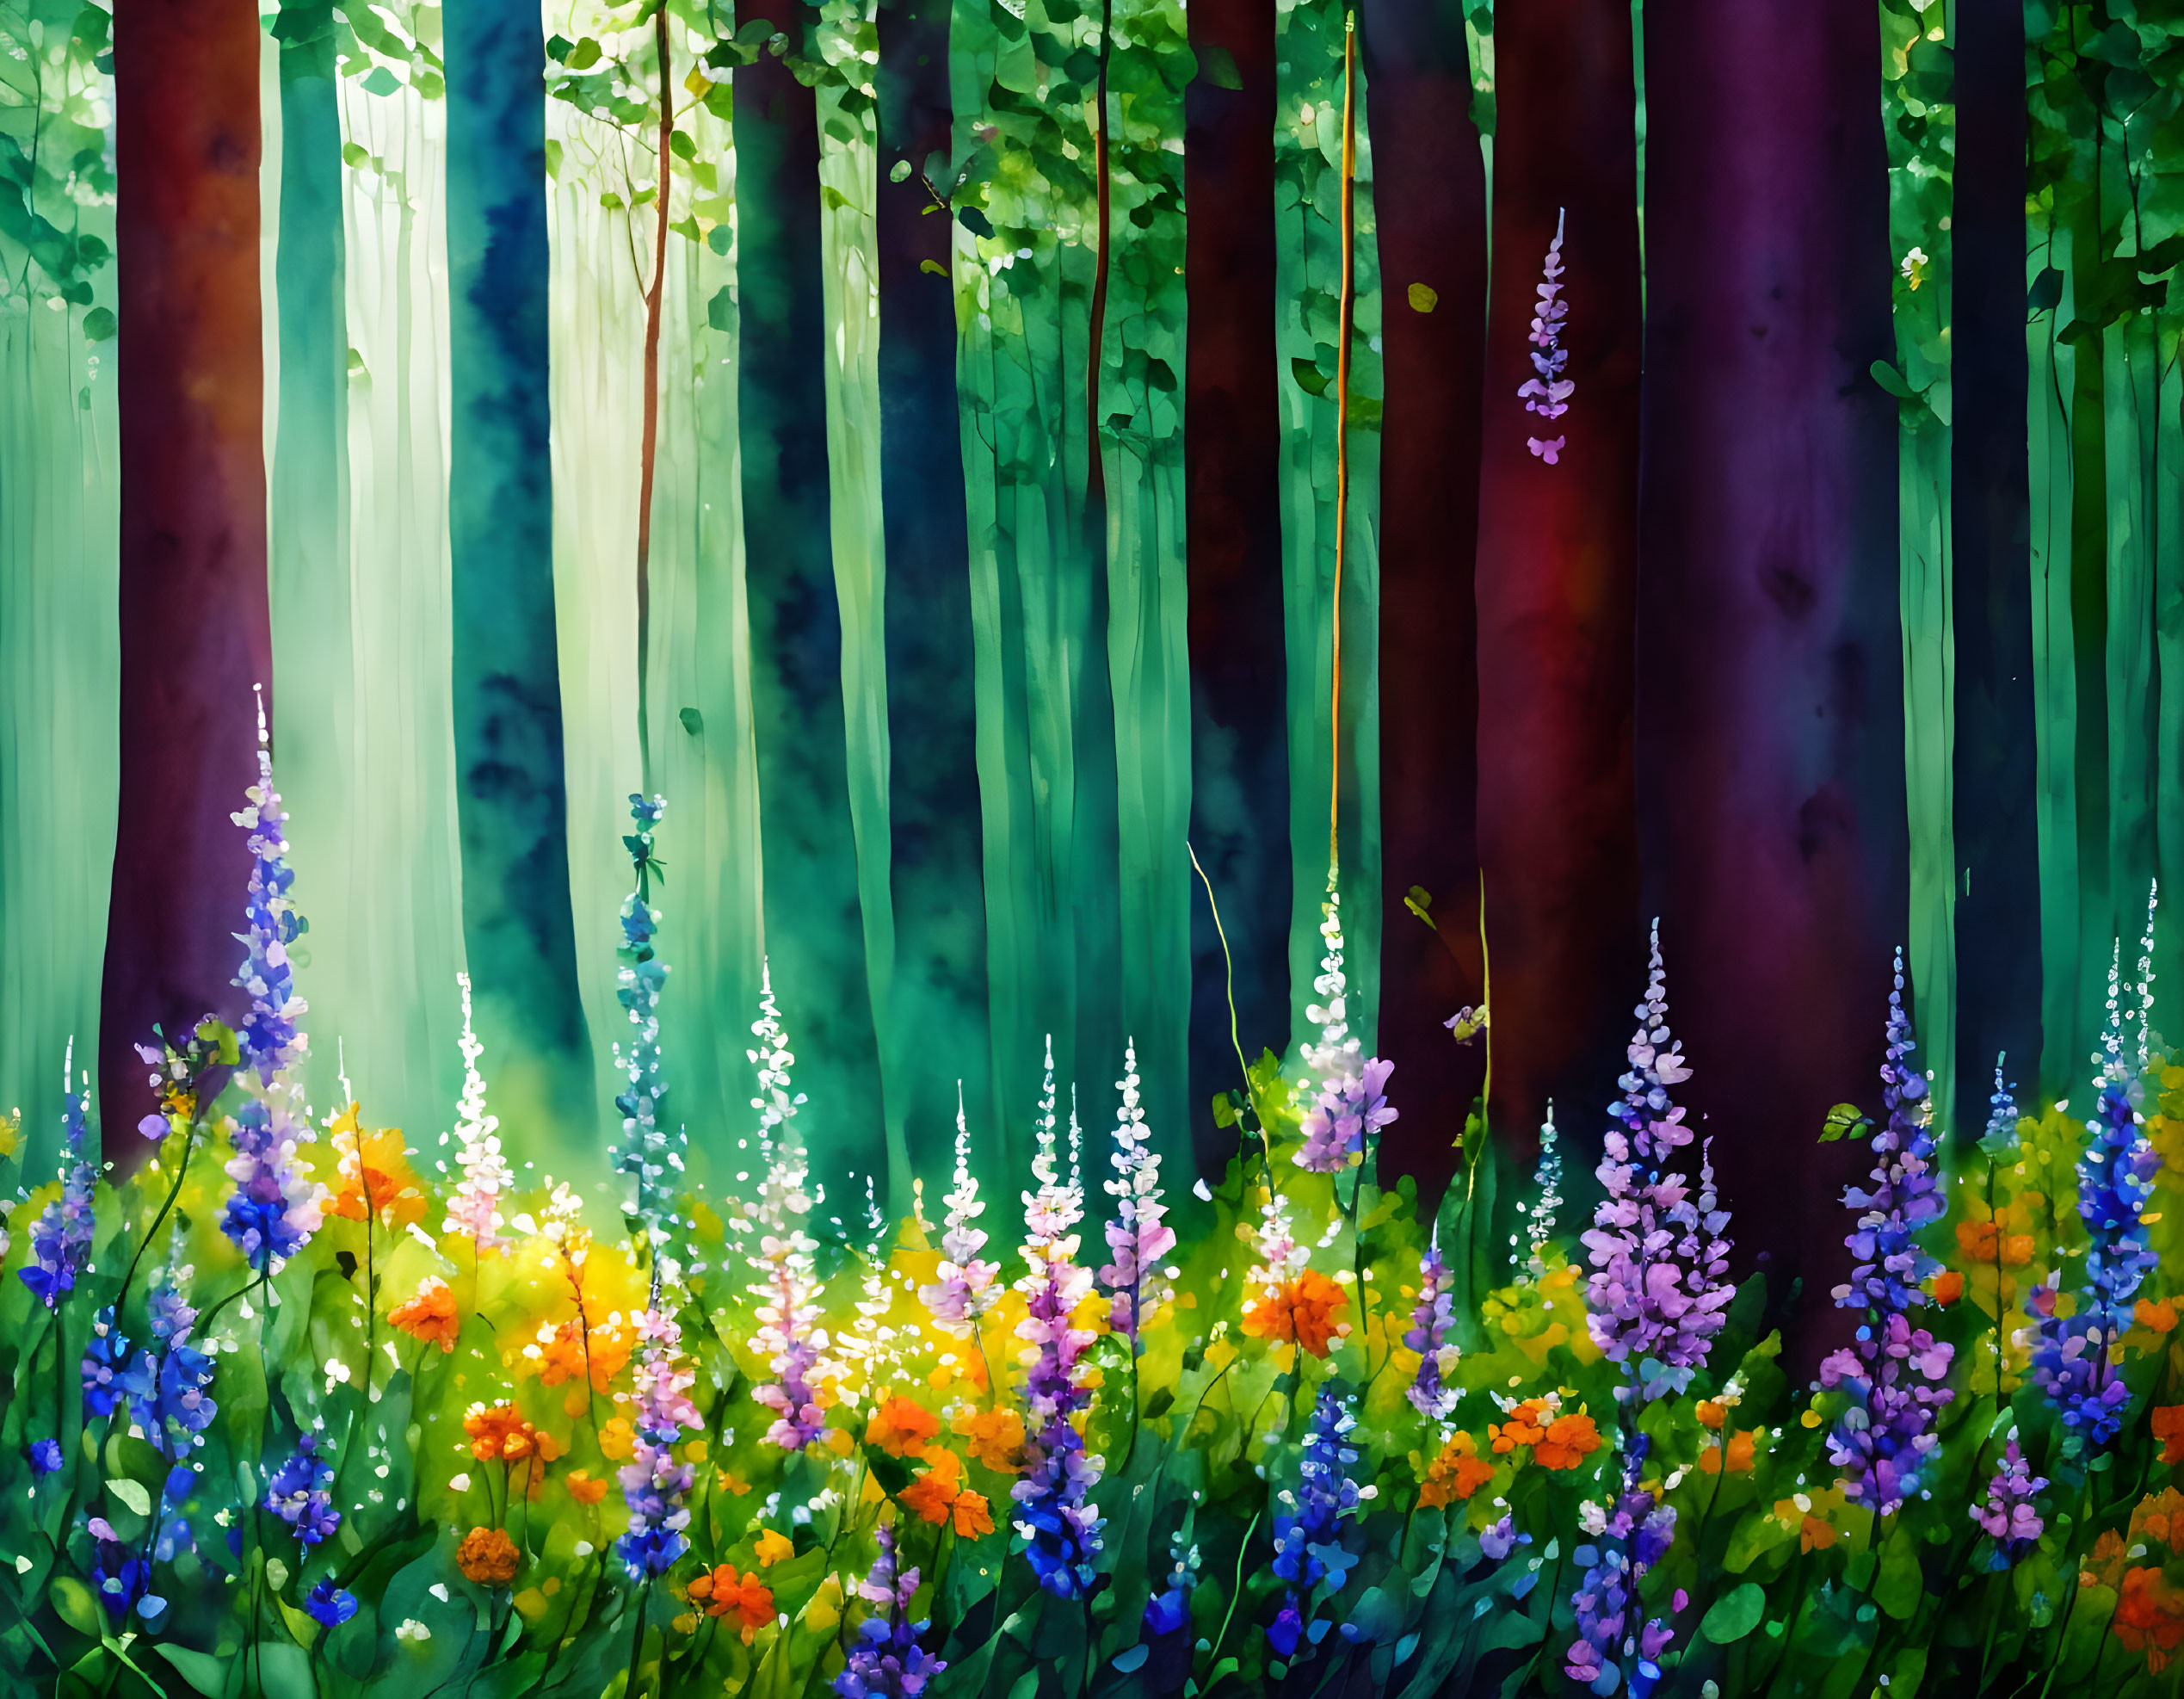 Lush forest digital painting with sunlight and wildflowers